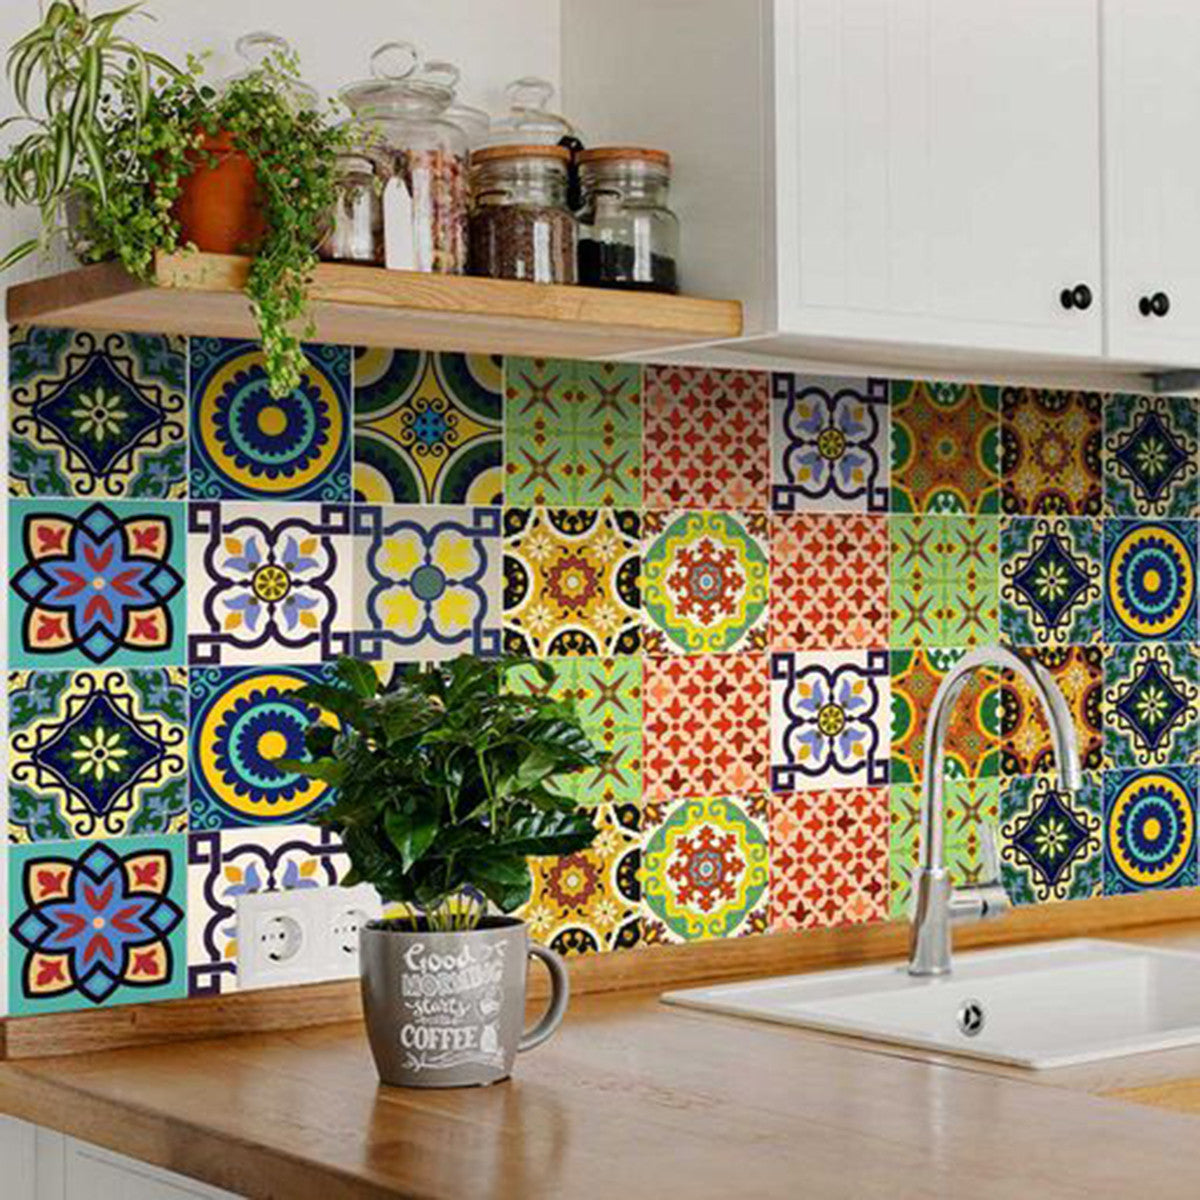 8" X 8" Euro Mosaic Peel and Stick Removable Tiles